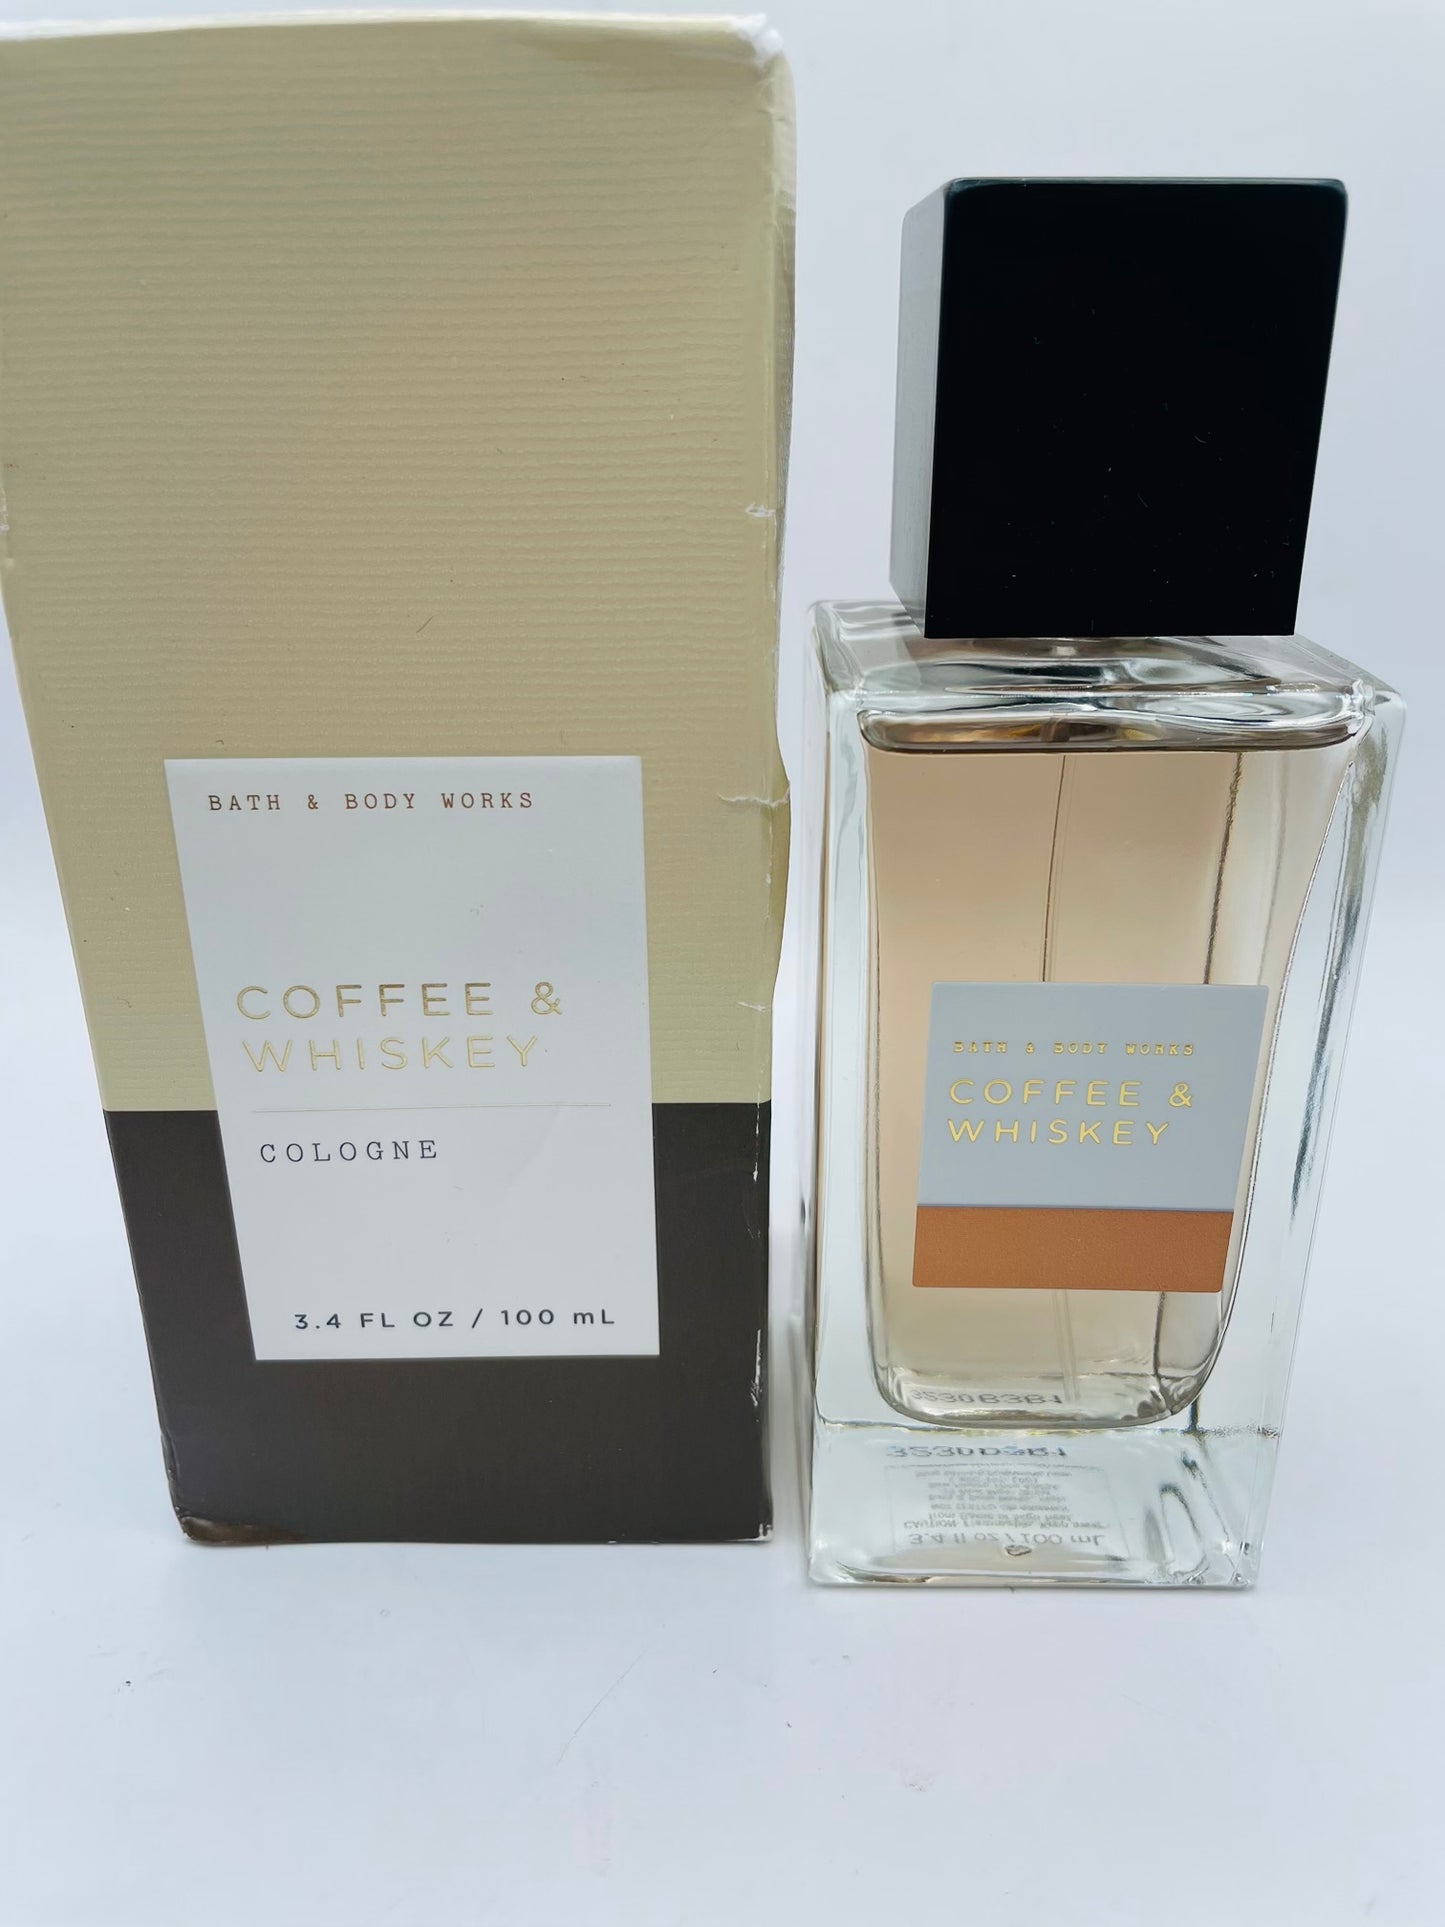 Bath and body works coffee and whiskey perfume